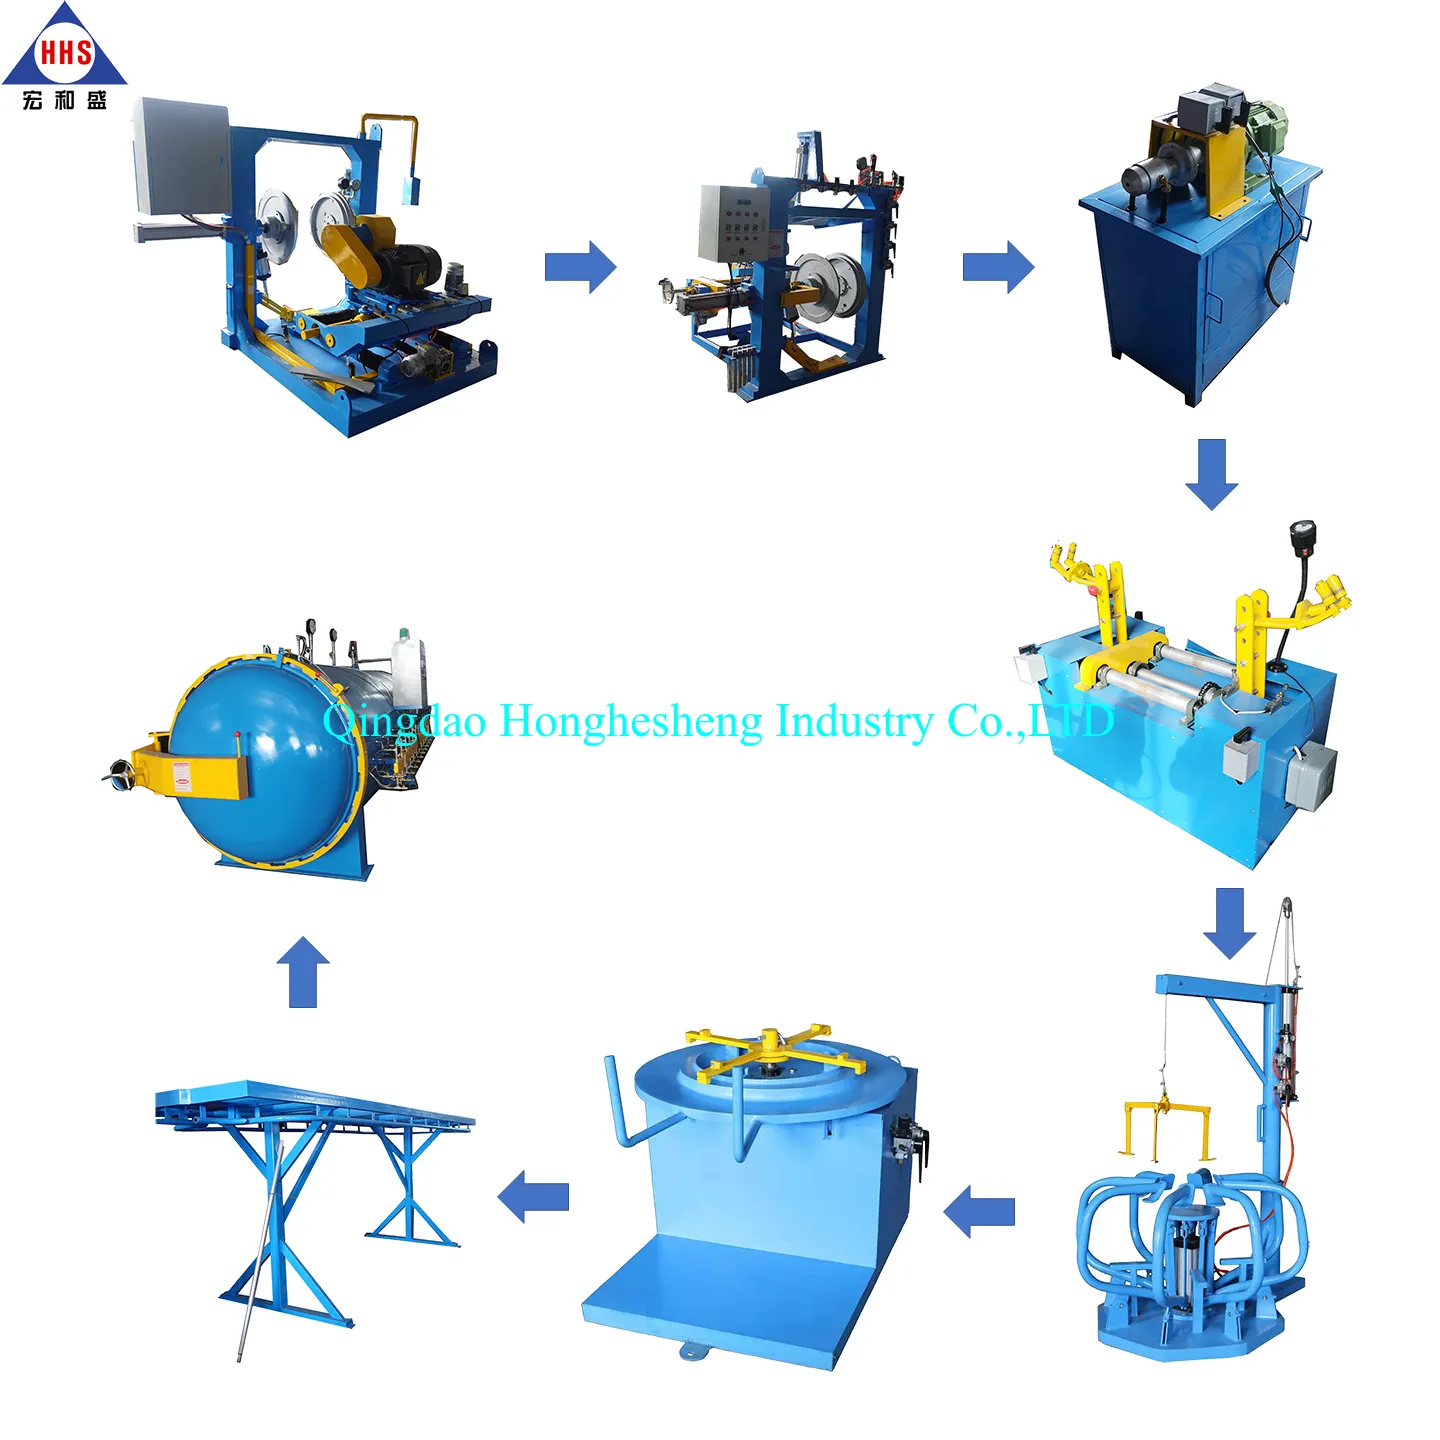 Complete set of Tyre Retread Production Line/tire Building Machinery/tyre Retreading Machine